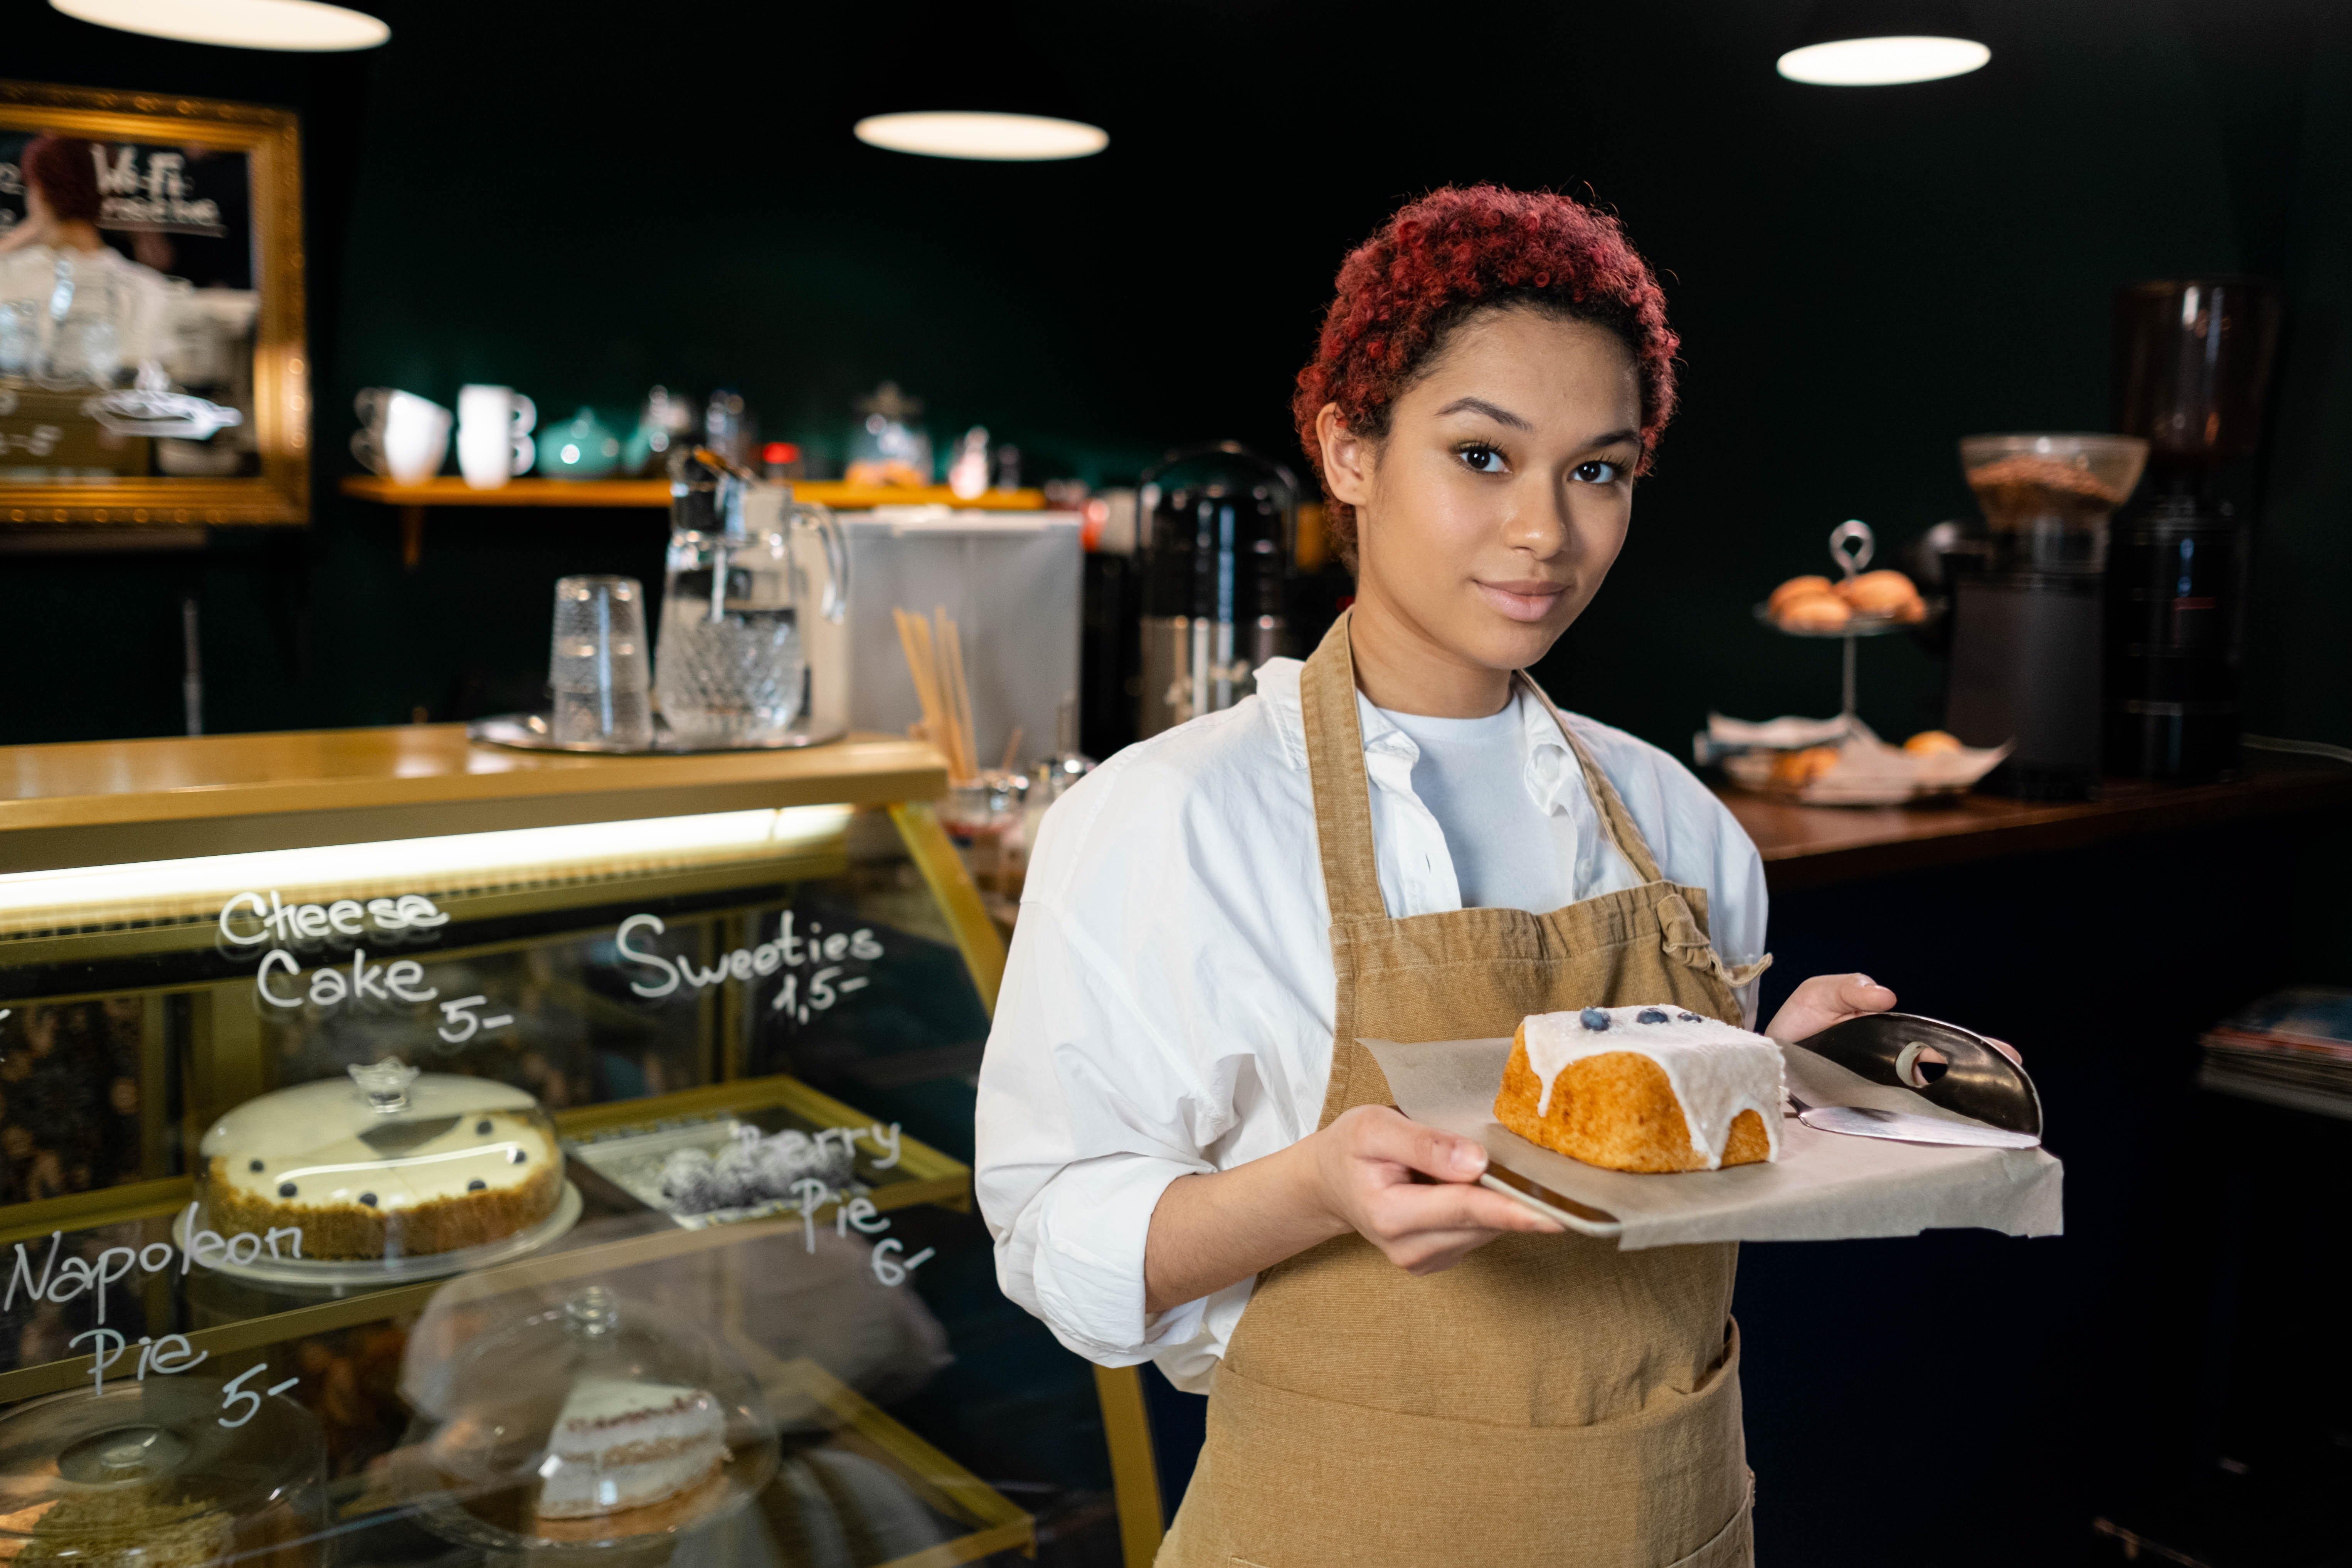 Waitress standing with a cake | Photo: Pexels